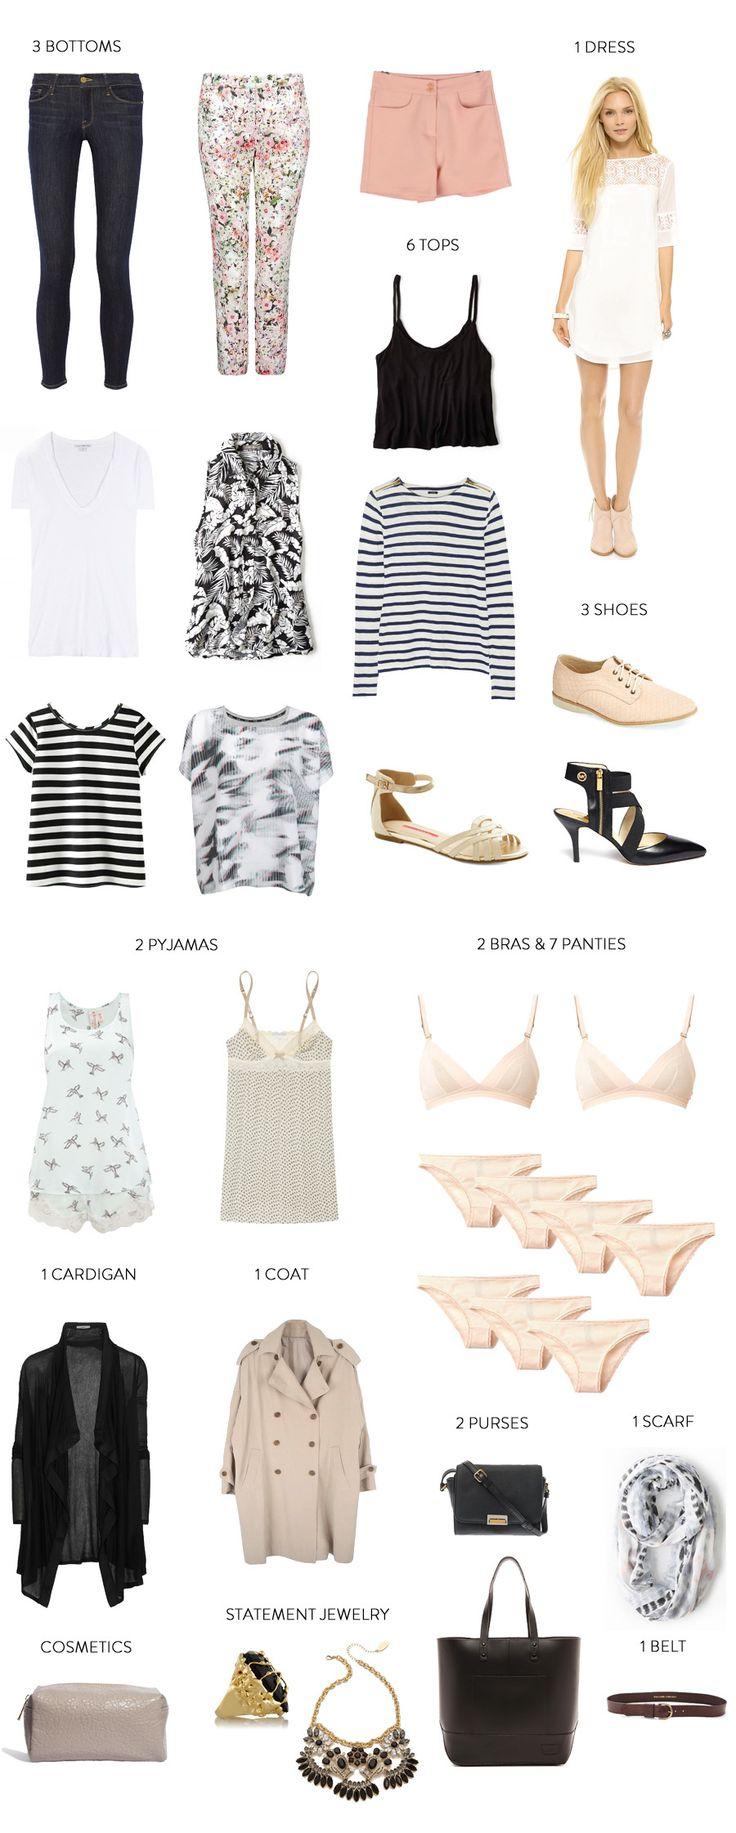 Hochzeit - How To Pack For A Week In A Carry On (in Style)